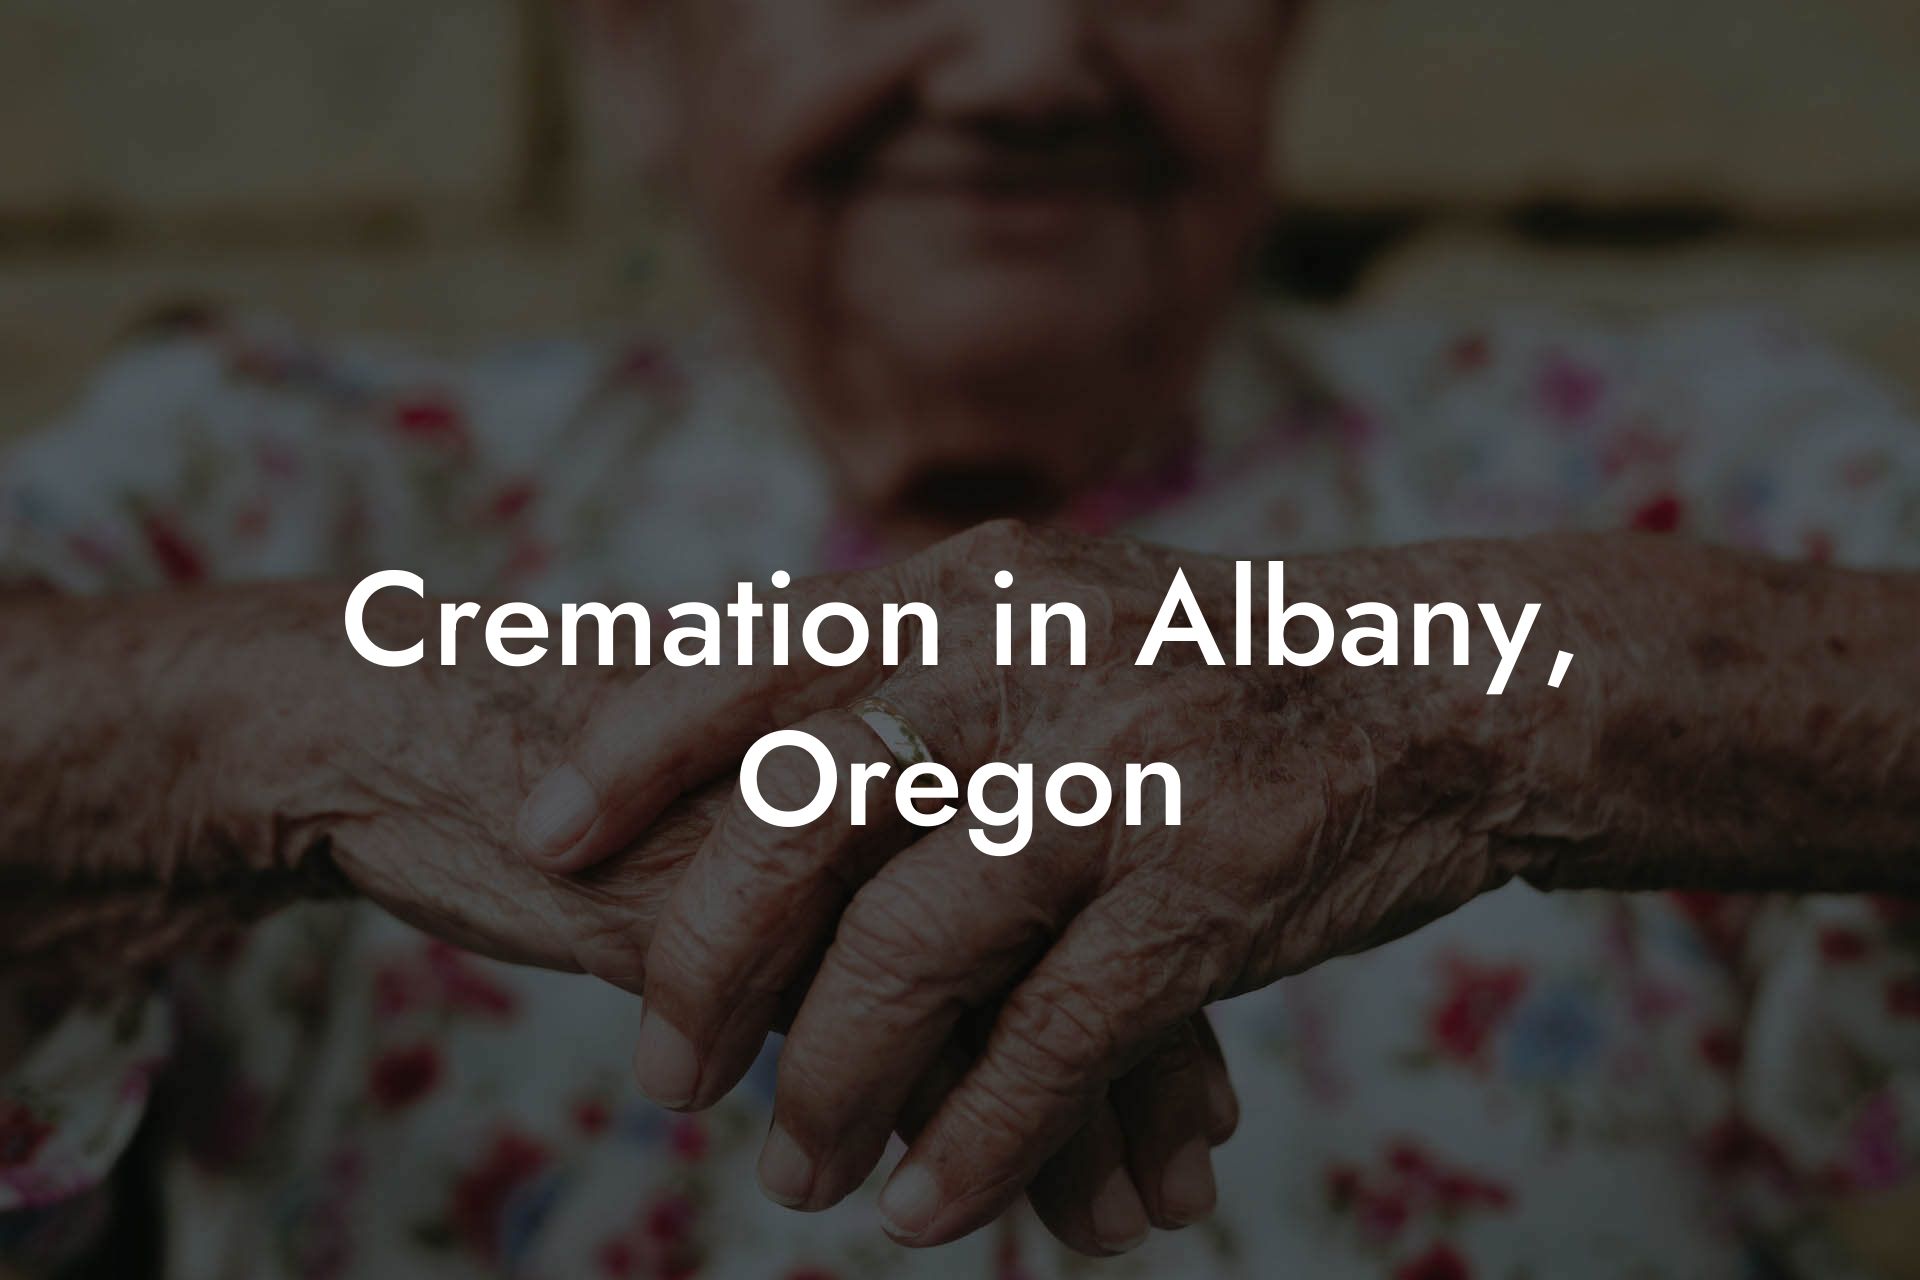 Cremation in Albany, Oregon